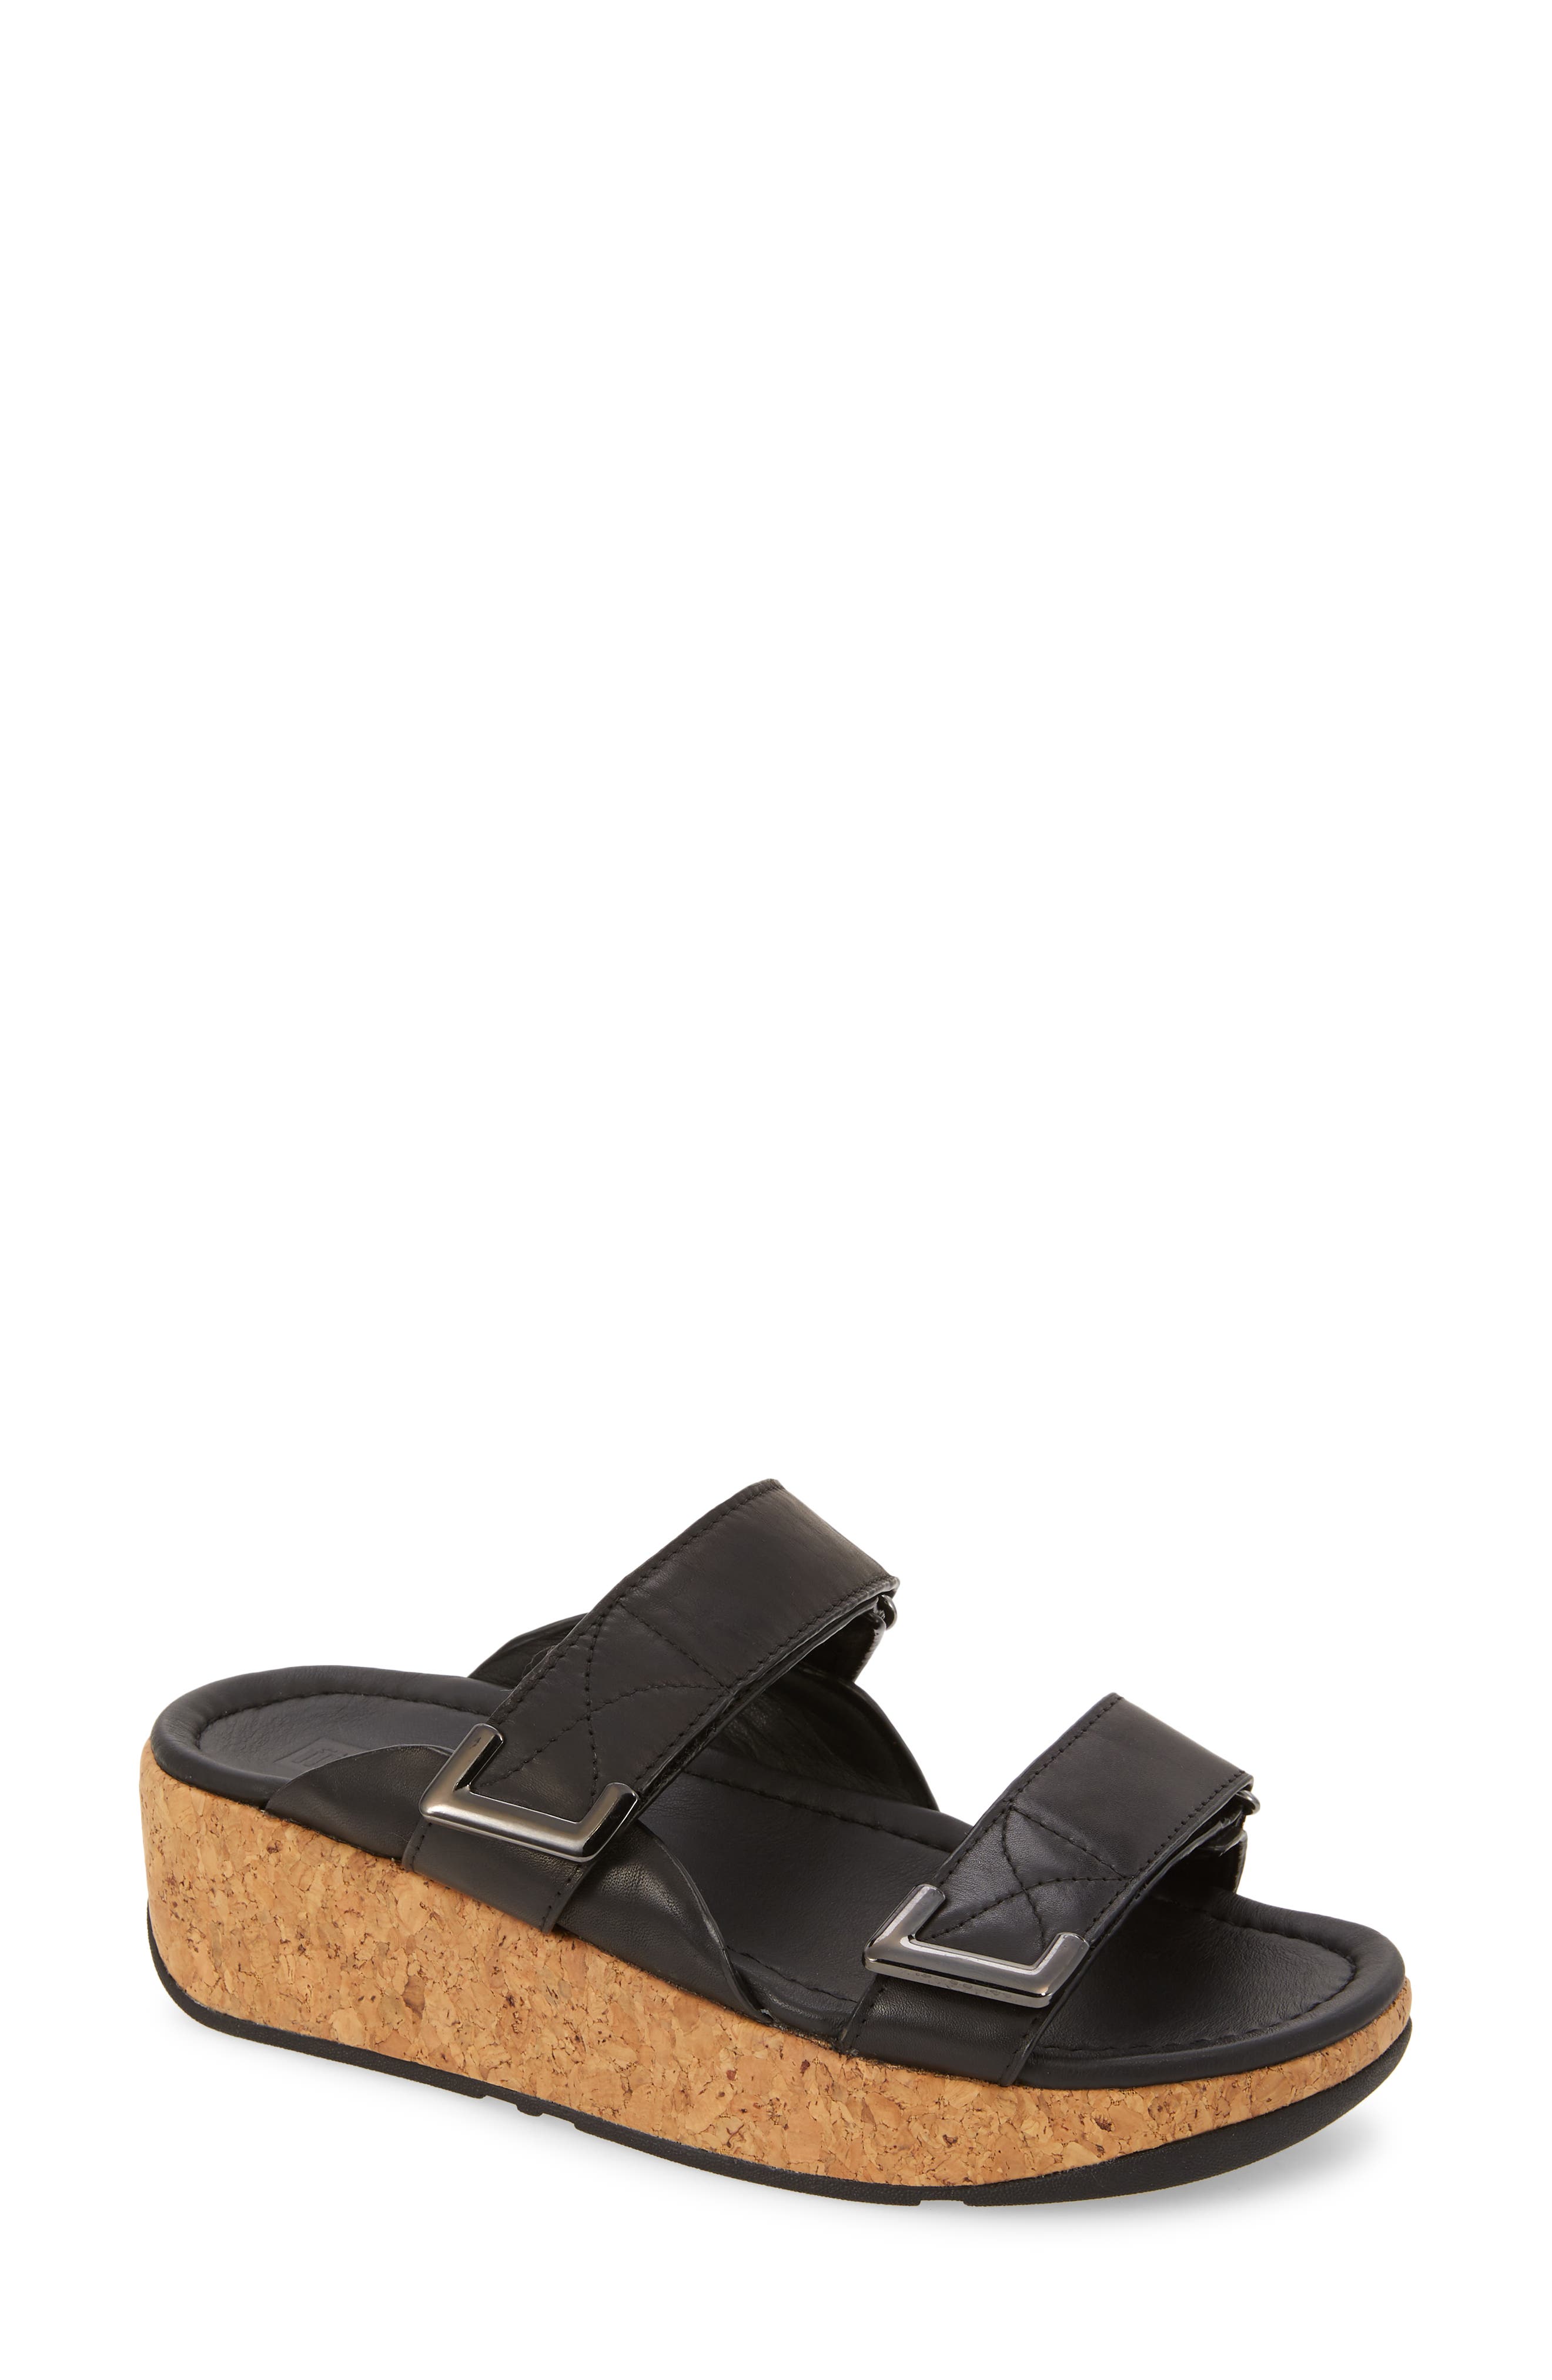 fitflop sneakers nordstrom